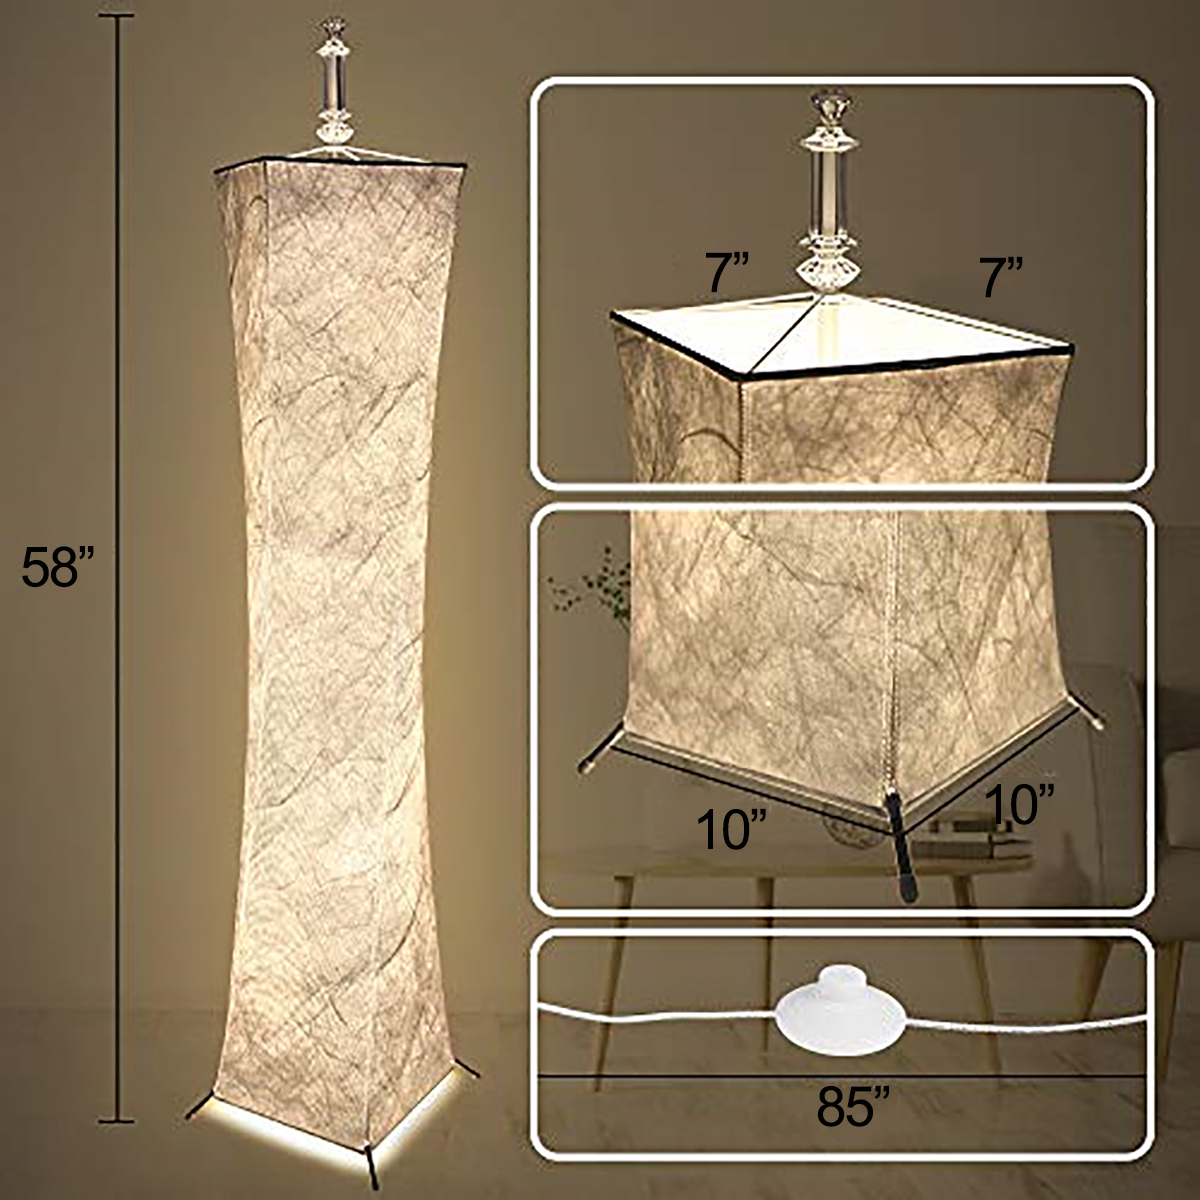 12V-LED-Floor-Lamp-Remote-Control-RGB-Color-Changing-58quot-Height-Bulbs-for-Livingroomish-1806500-9